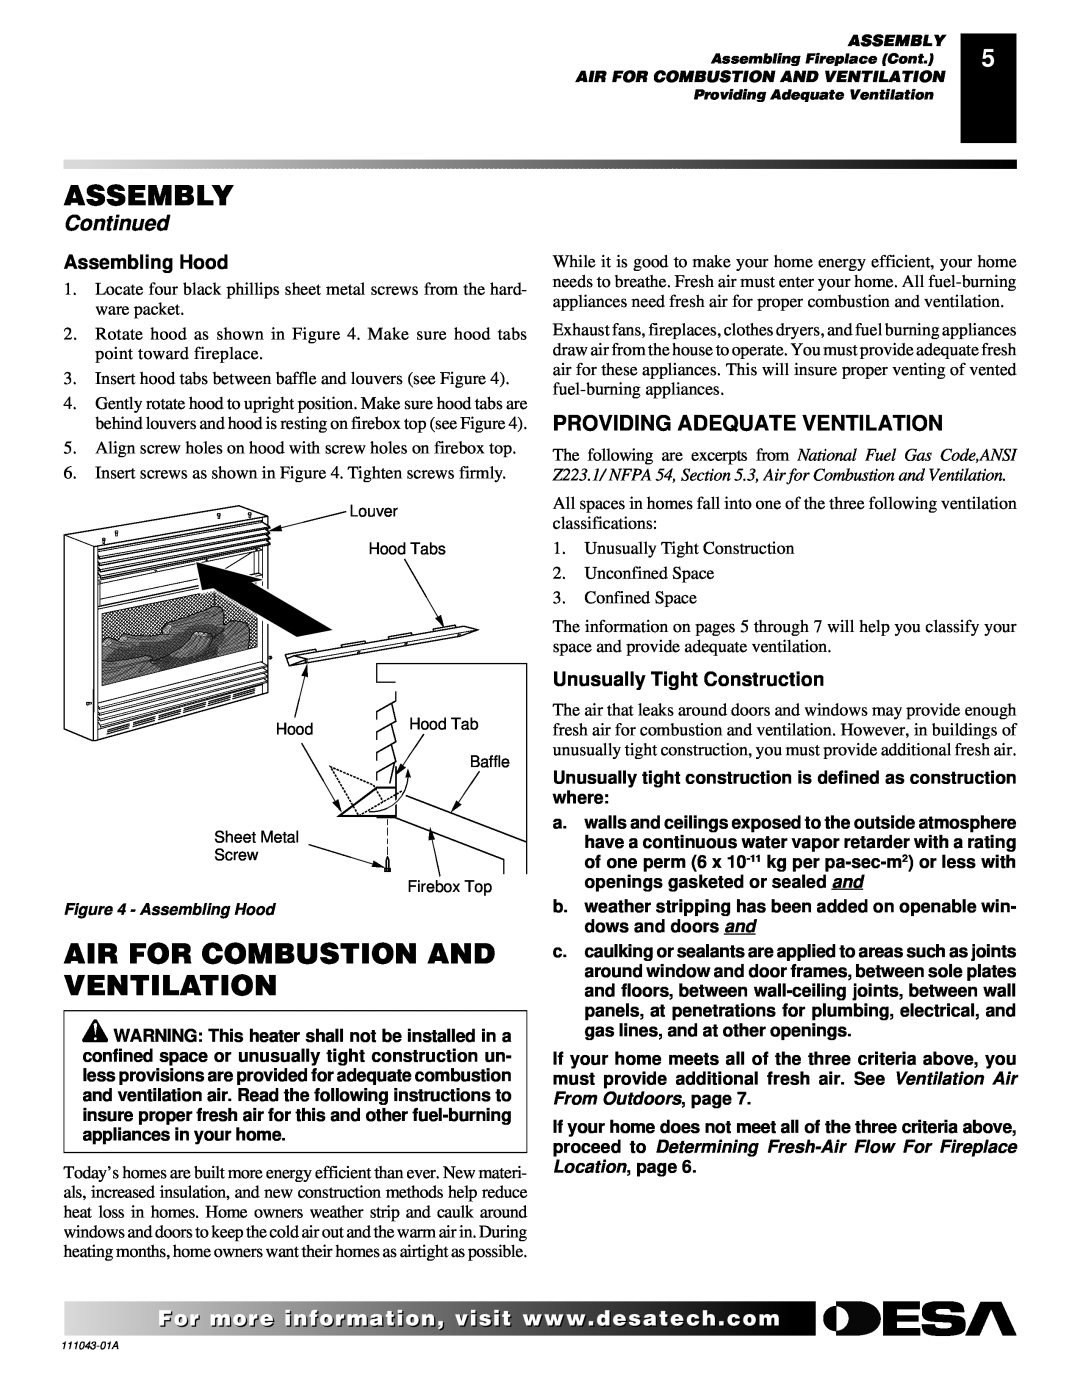 Vanguard Heating WMH26TNB installation manual Air For Combustion And Ventilation, Assembly, Continued, Assembling Hood 